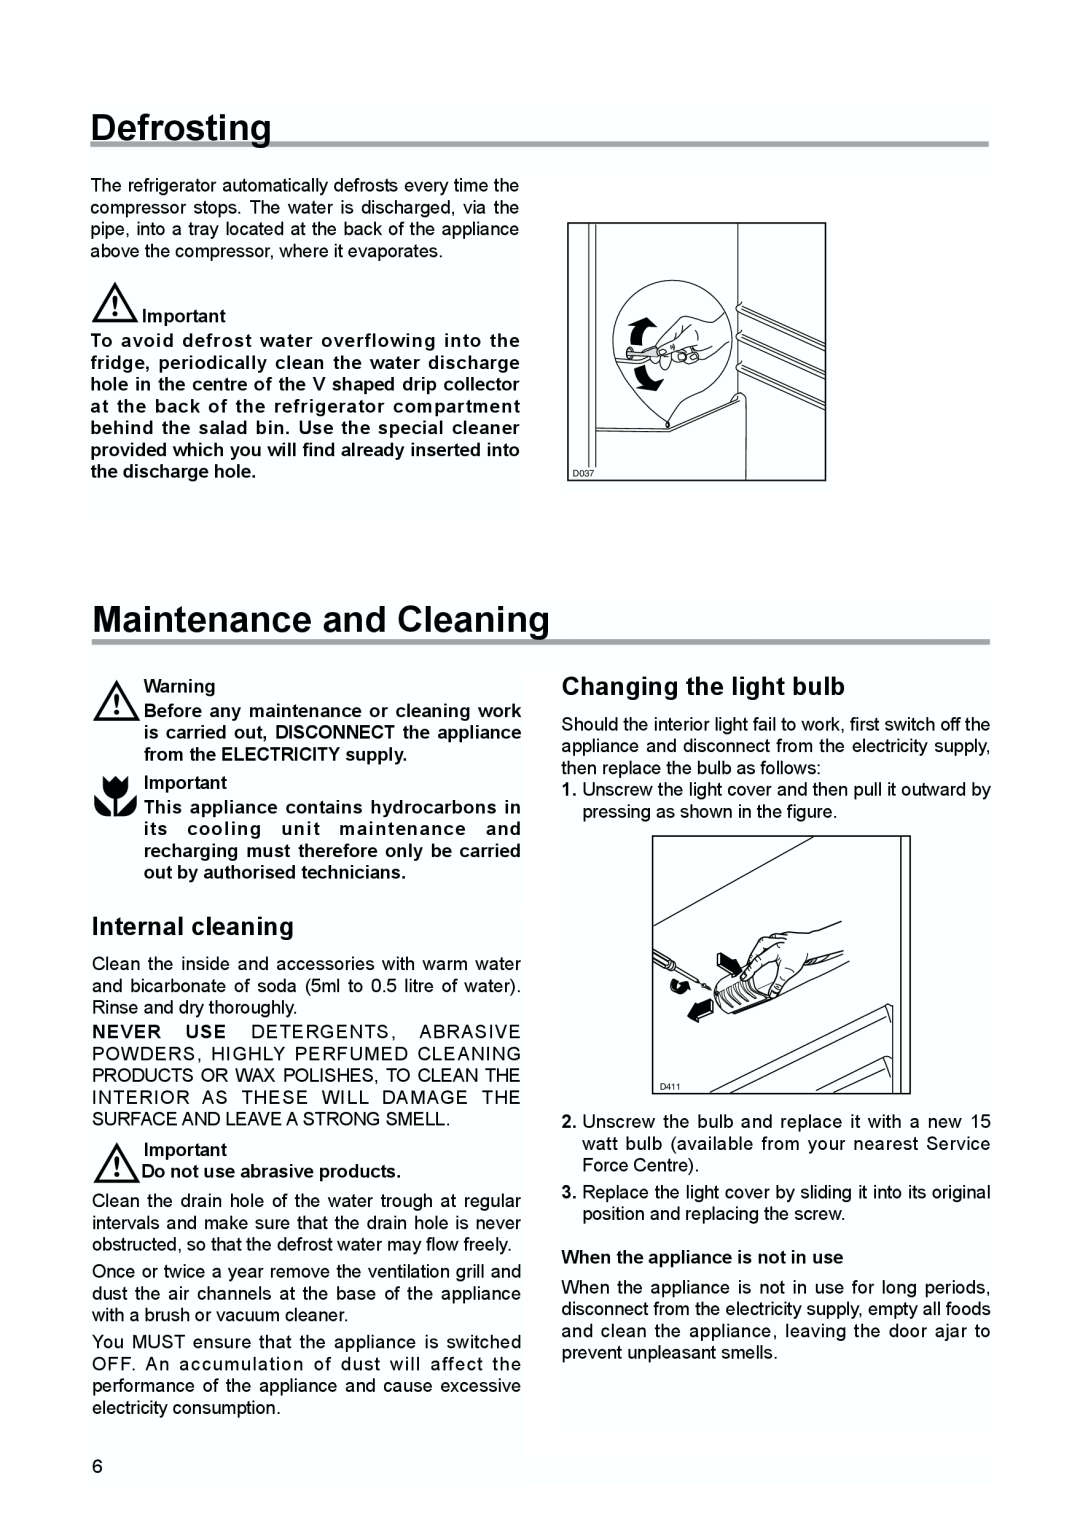 Zanussi ZI 9155 A, 338, Refrigerator manual Defrosting, Maintenance and Cleaning, Internal cleaning, Changing the light bulb 